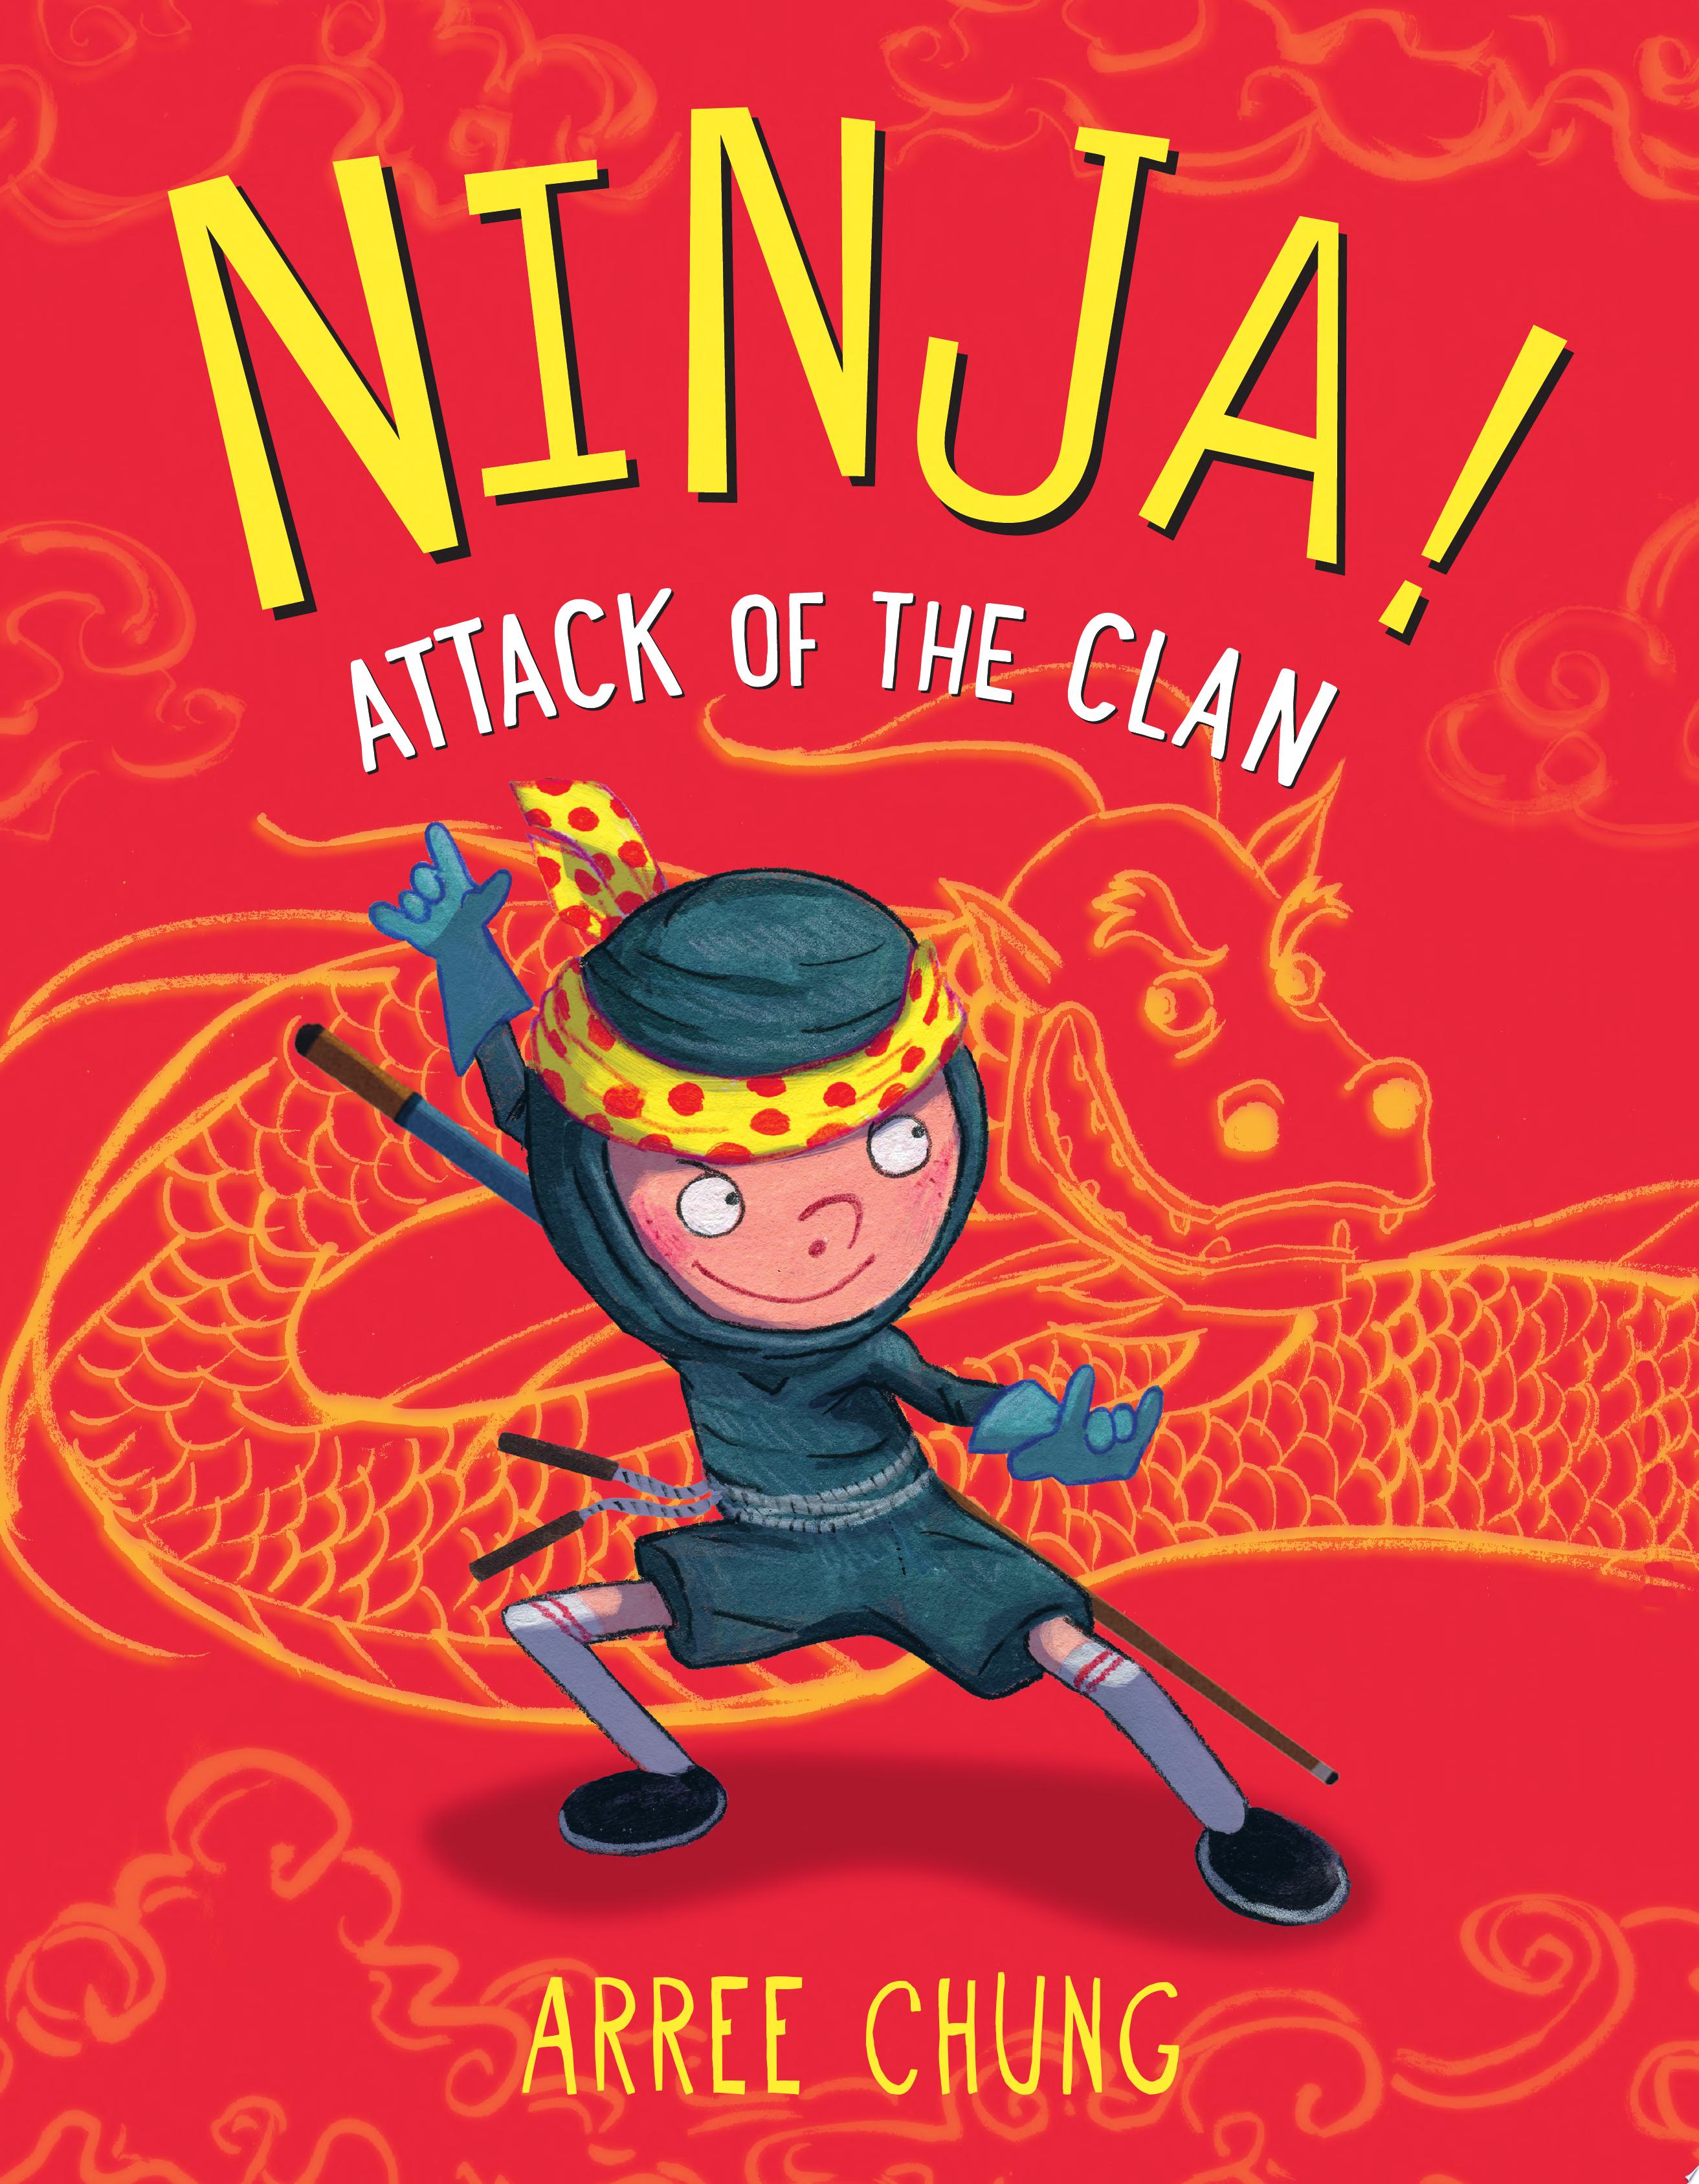 Image for "Ninja! Attack of the Clan"